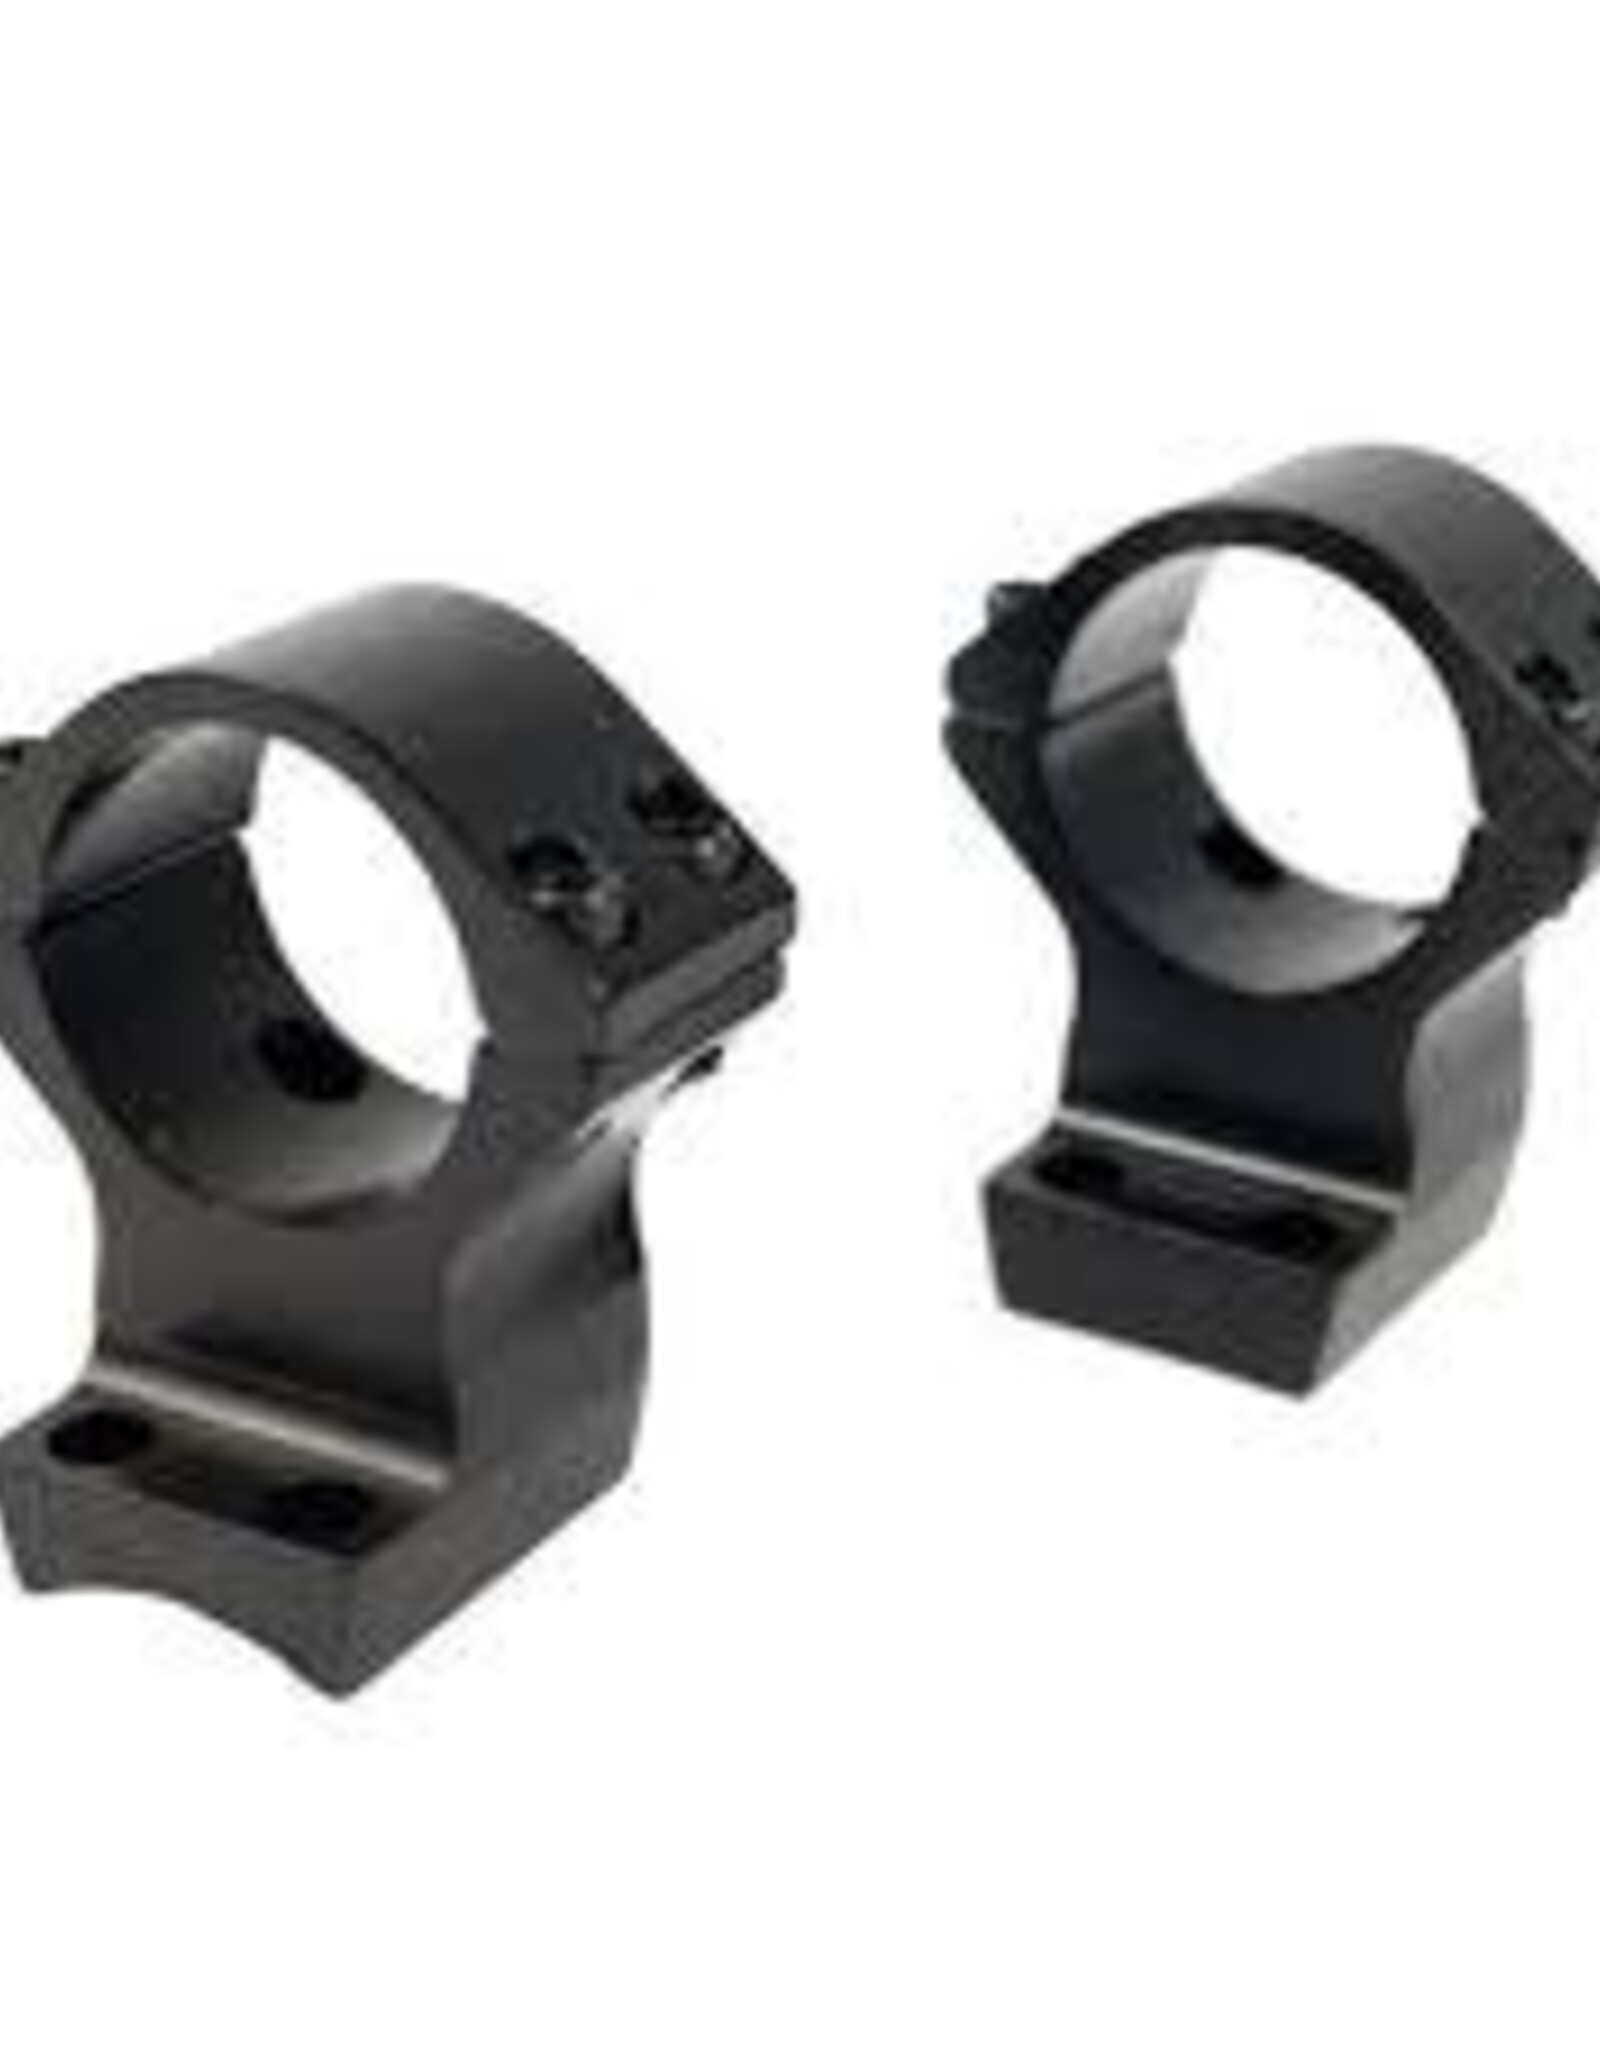 Browning X-Bolt Integrated Scope Mounts